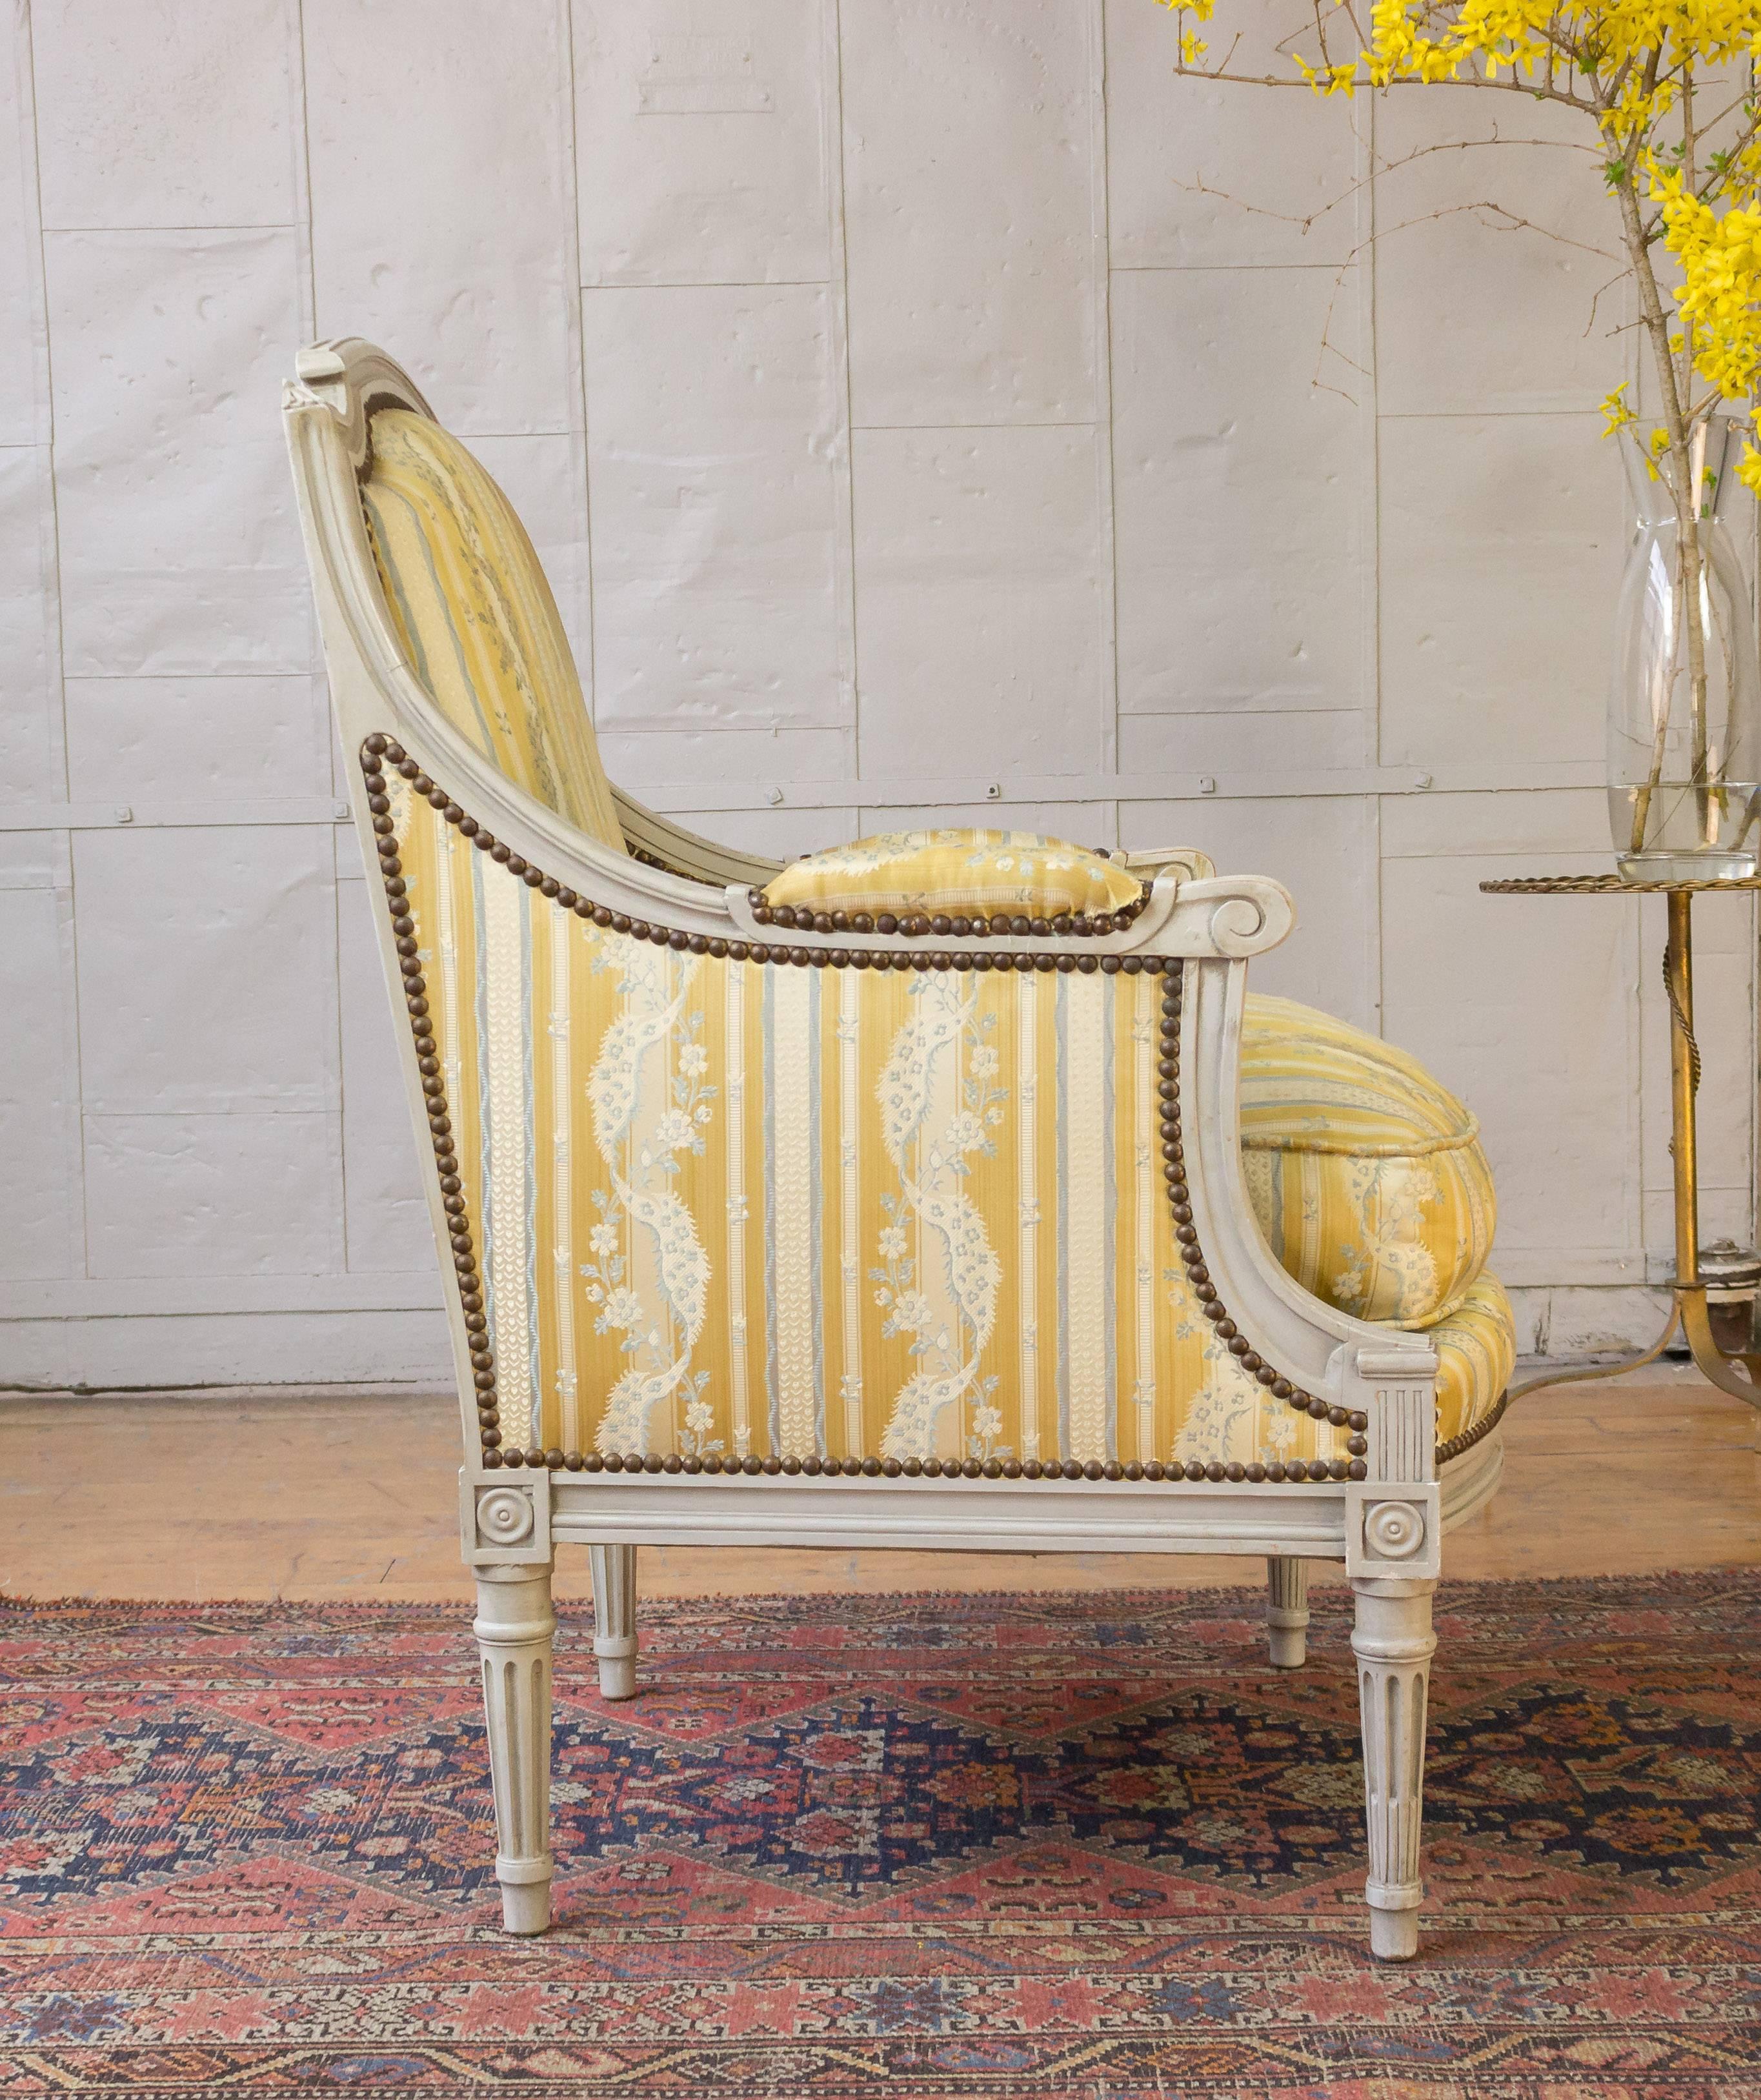 A sophisticated pair of French Louis XVI style armchairs. This exquisite pair of French Louis XVI armchairs will make a stunning addition to any home. Featuring graceful grey patinated and carved wooden frames, these chairs are classically designed